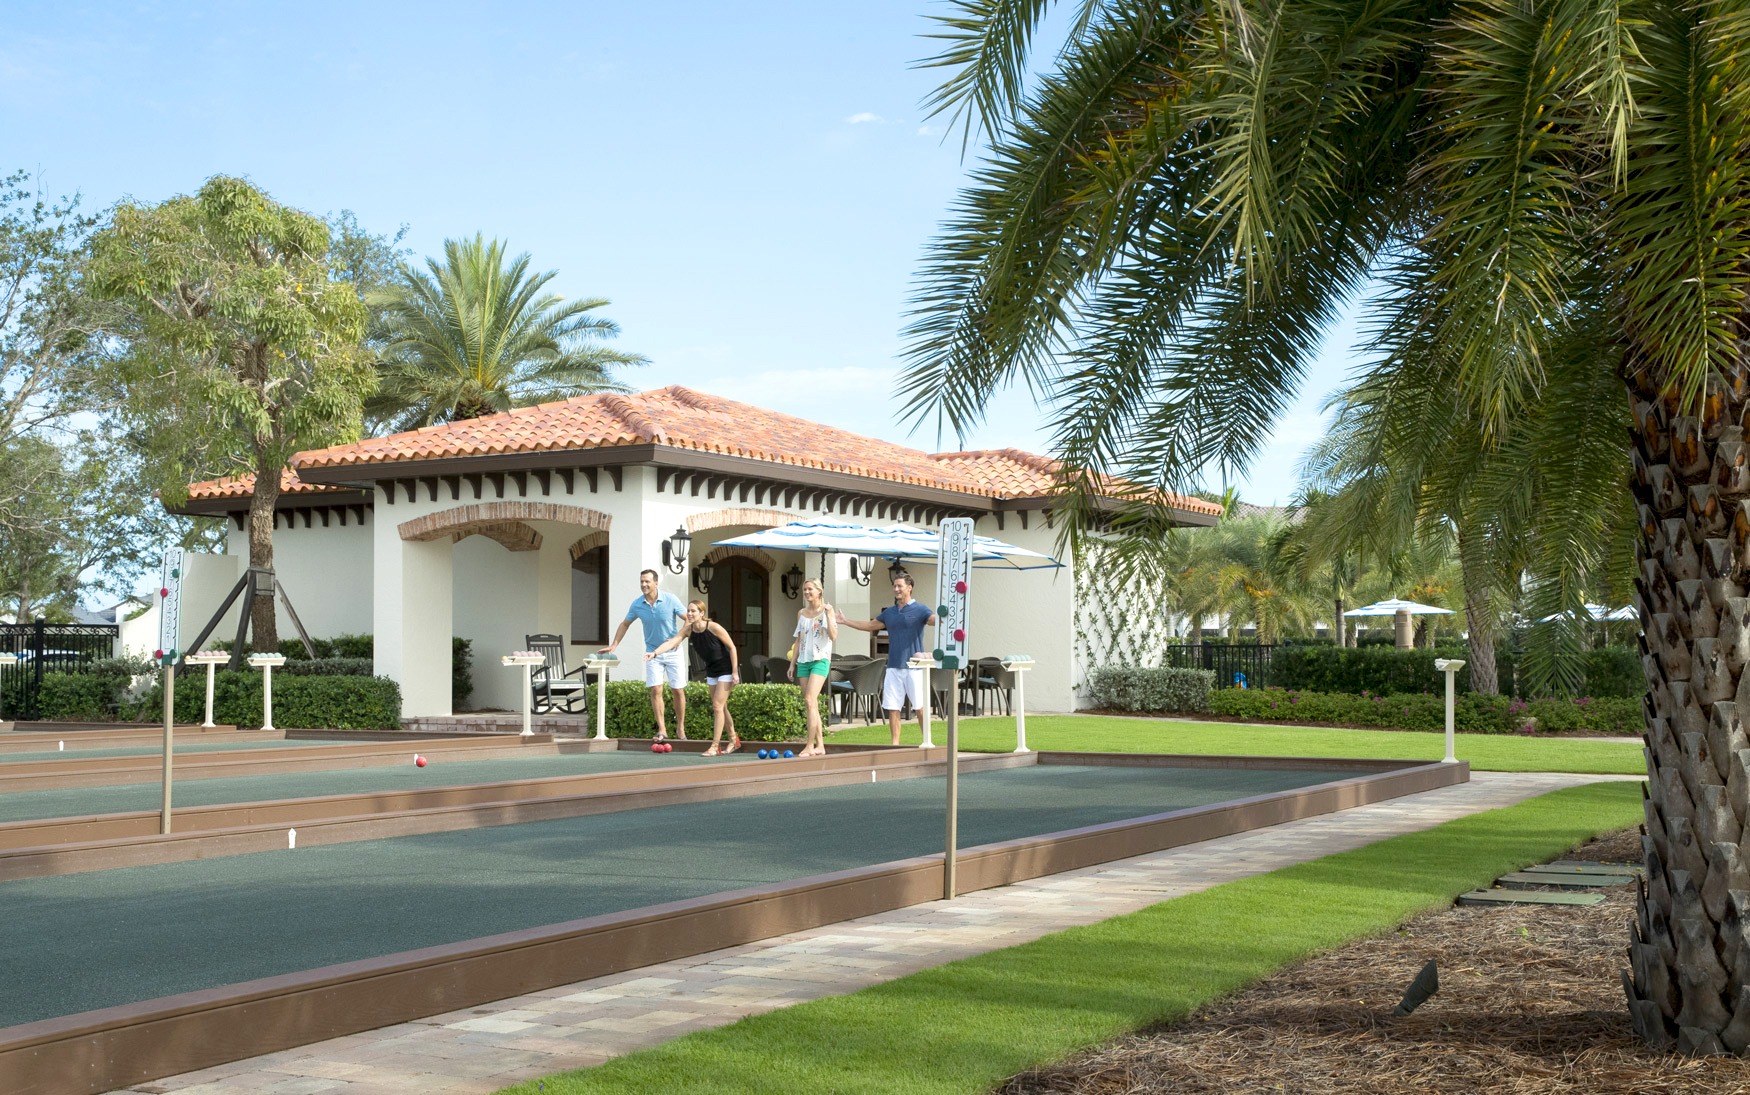 Har Tru Tennis, Fitness Classes, and Other Health & Fitness Amenities You’ll Find at Talis Park